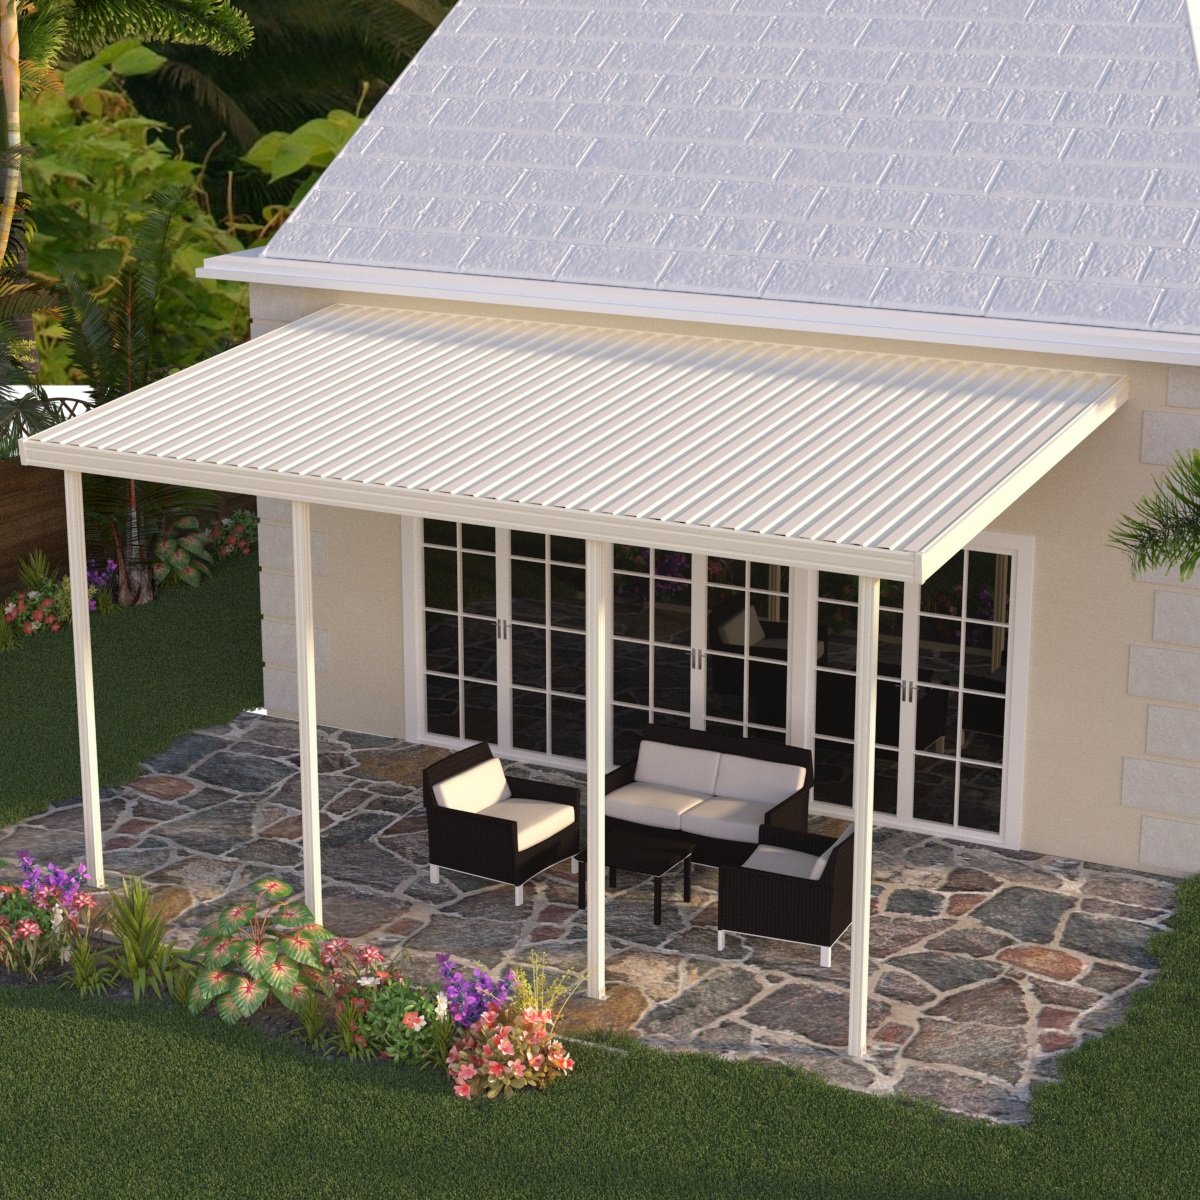 12 ft. Deep x 36 ft. Wide Ivory Attached Aluminum Patio Cover -5 Posts - (10lb Low Snow Area)